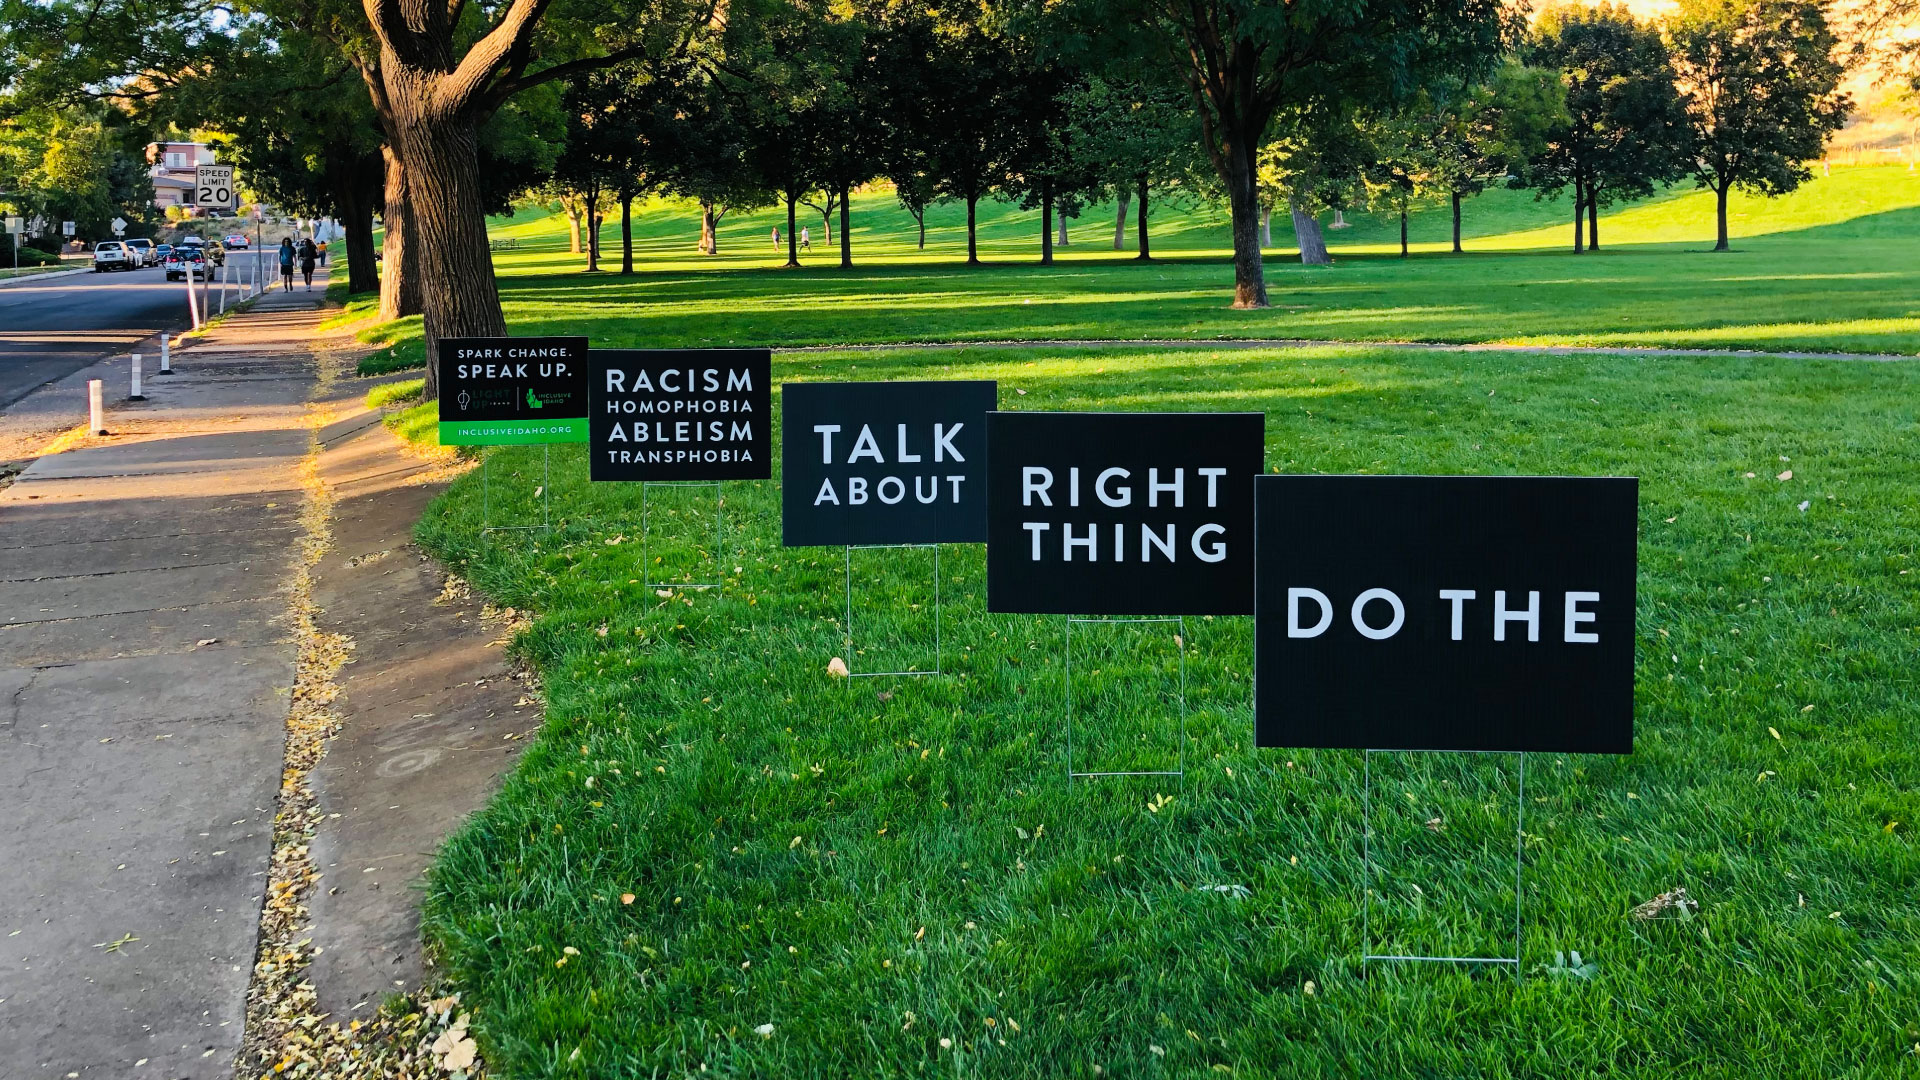 yard signs that read "do the right thing. spark change. speak up."